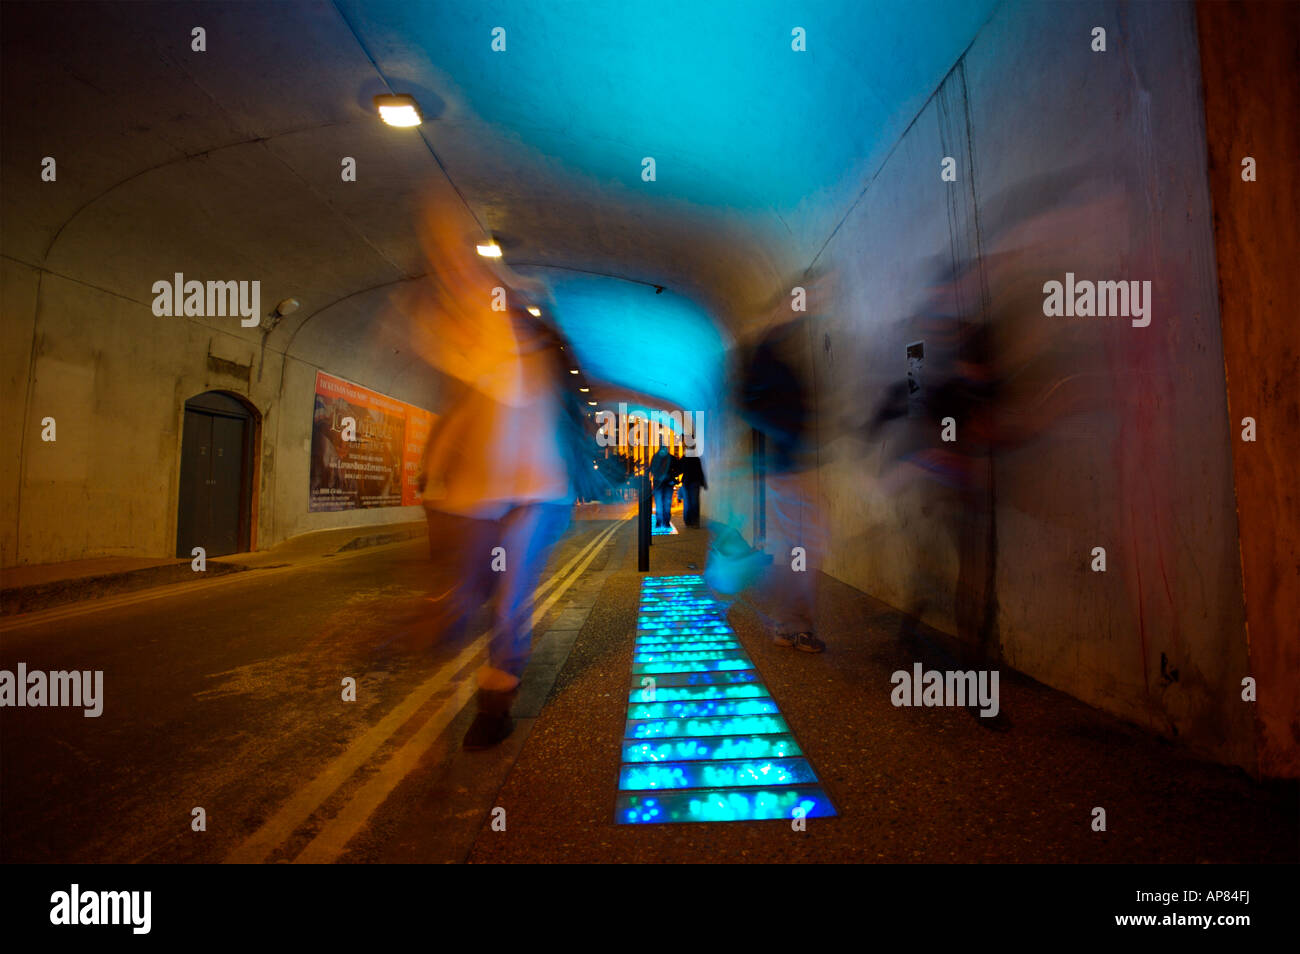 A tunnel lit with illuminated pavement on the south bank side of the river Thames, London. Stock Photo